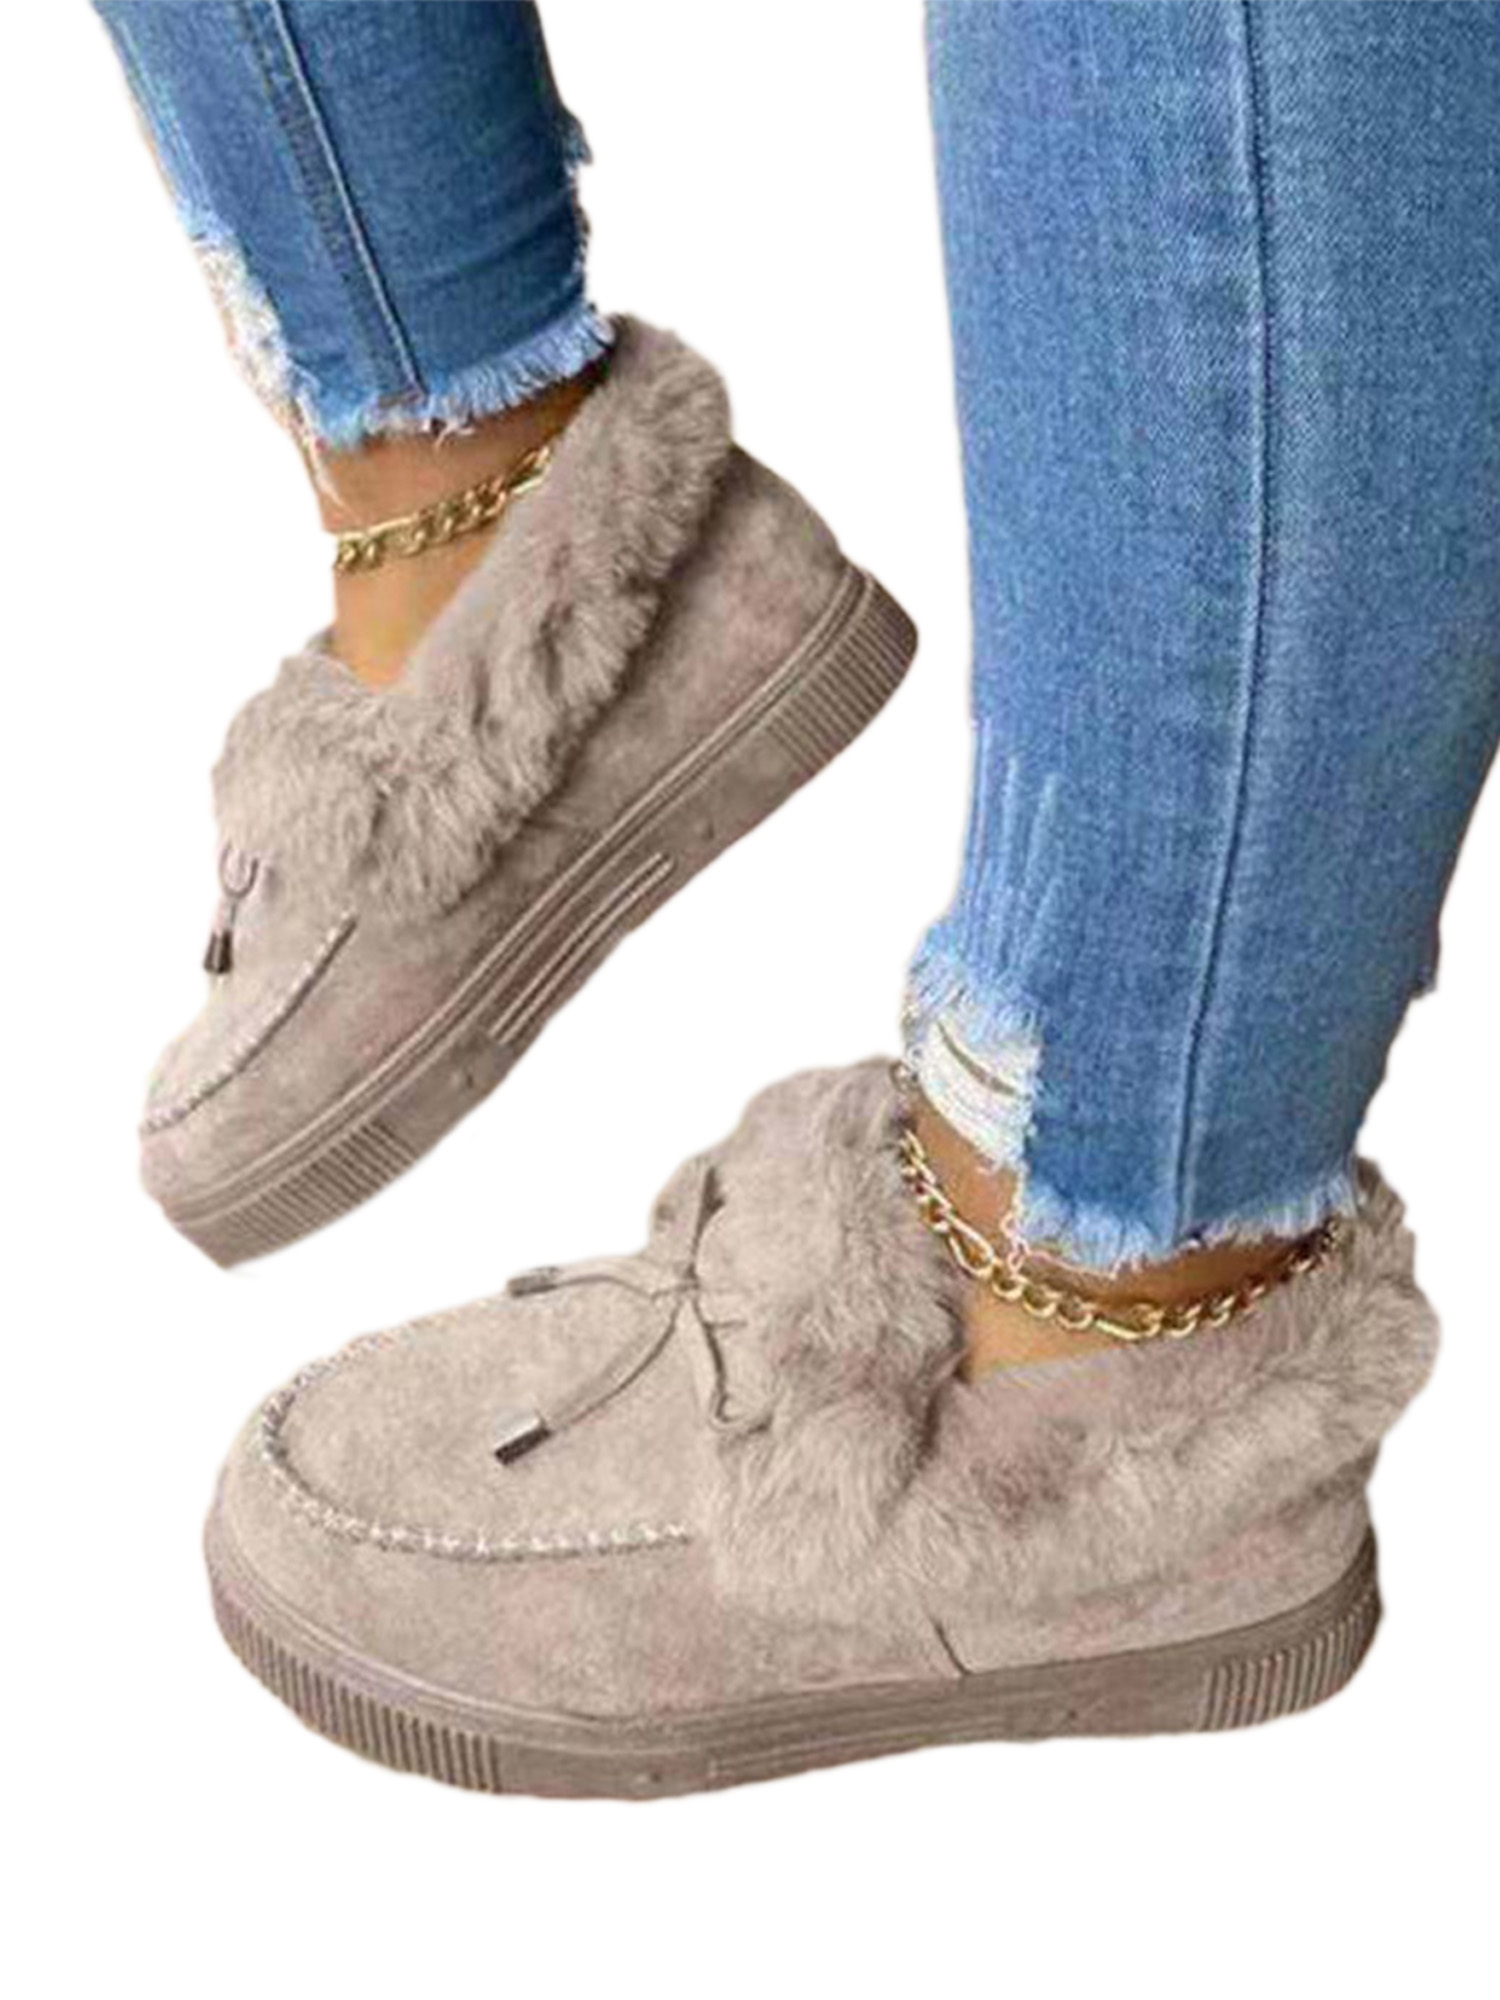 Avamo Women's Casual Shoes Loafers Plush Lined Low Top Casual Shoes Winter Warmer - image 1 of 7